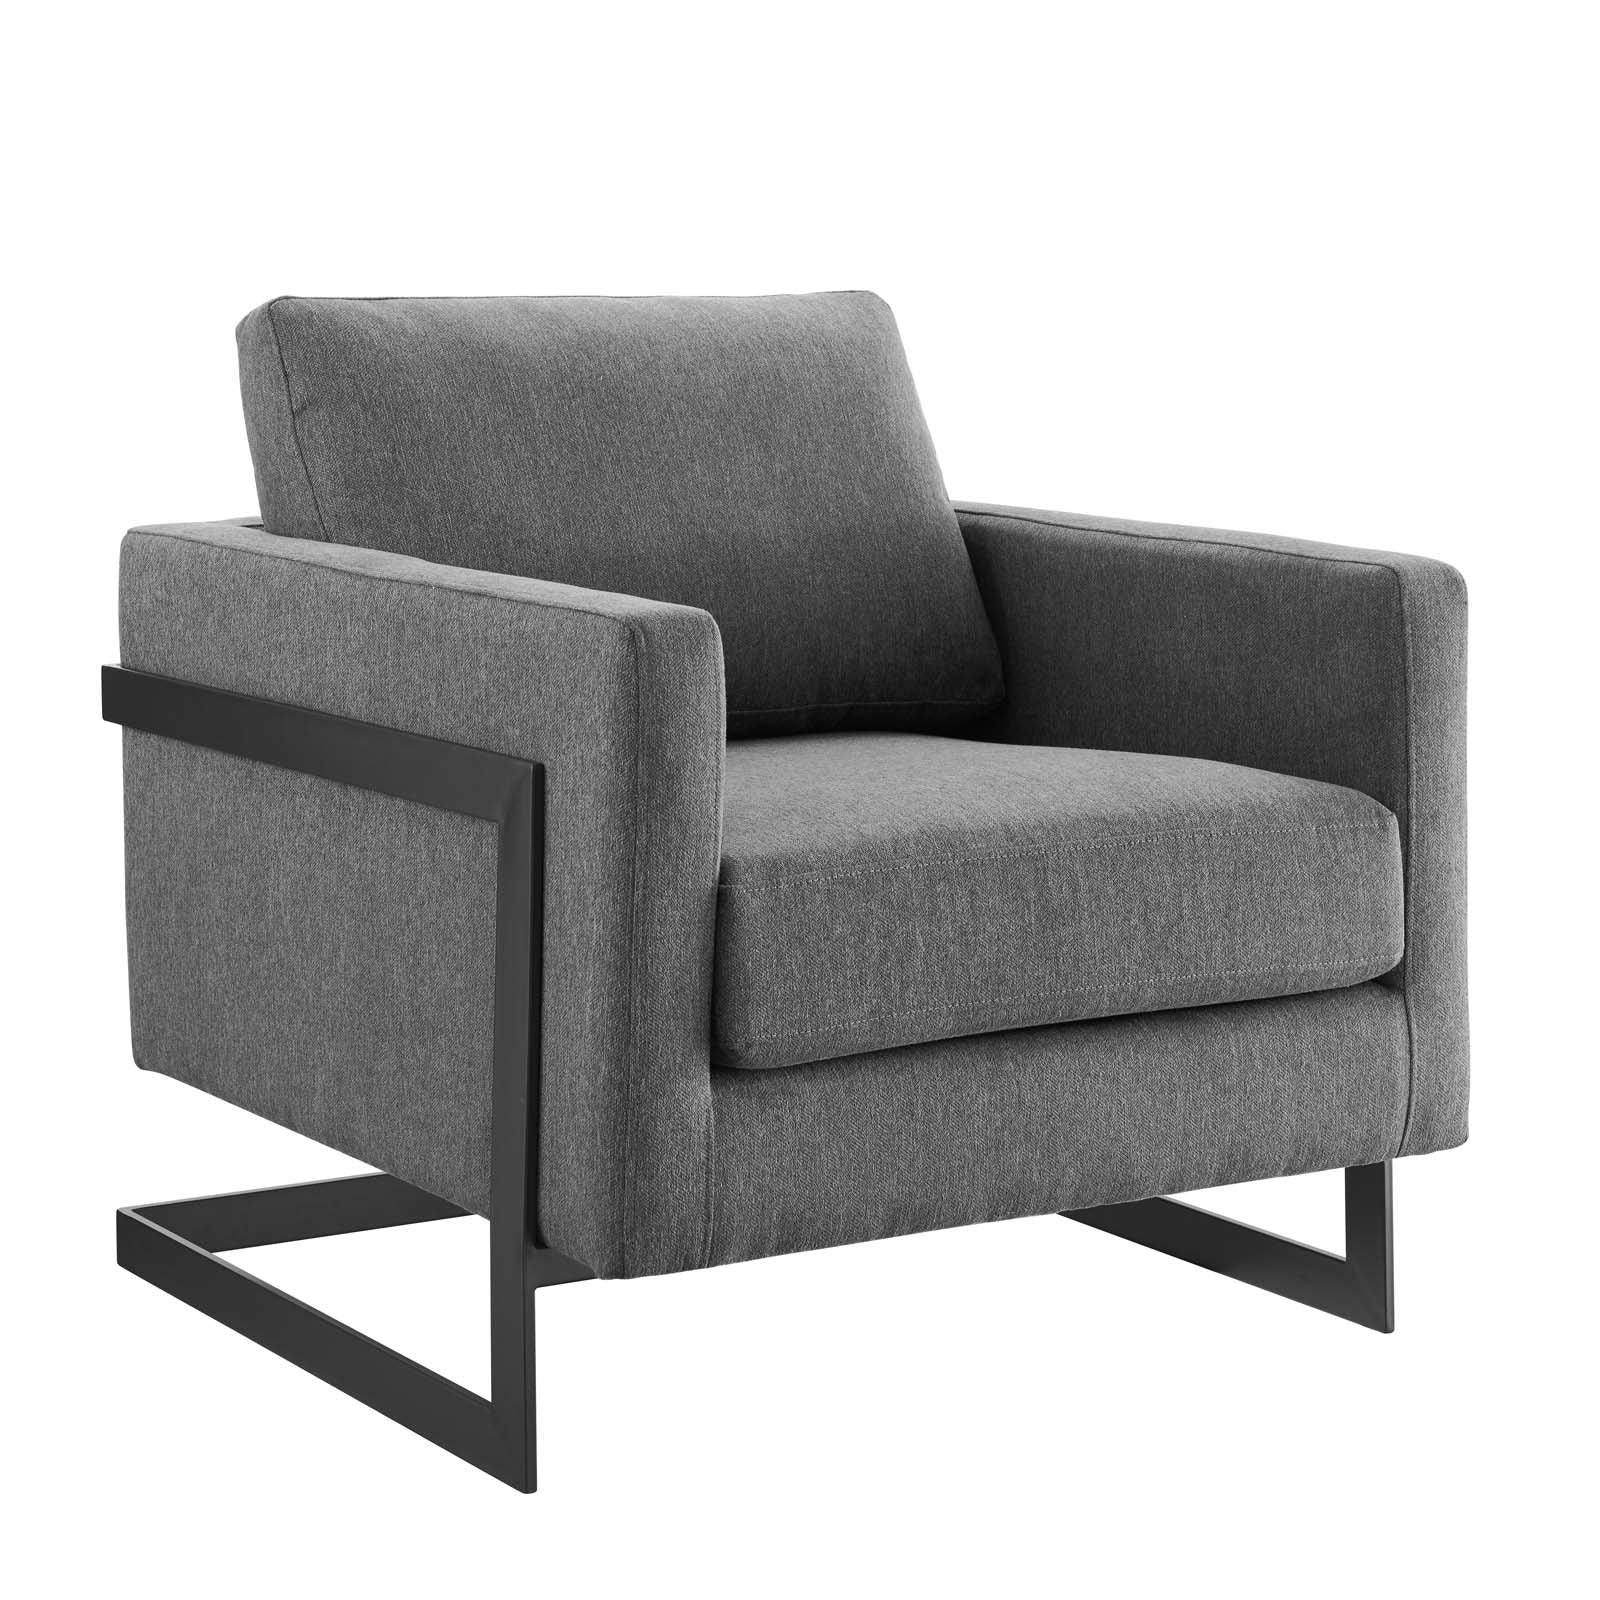 Modway Accent Chairs - Posse Upholstered Fabric Accent Chair Black Charcoal